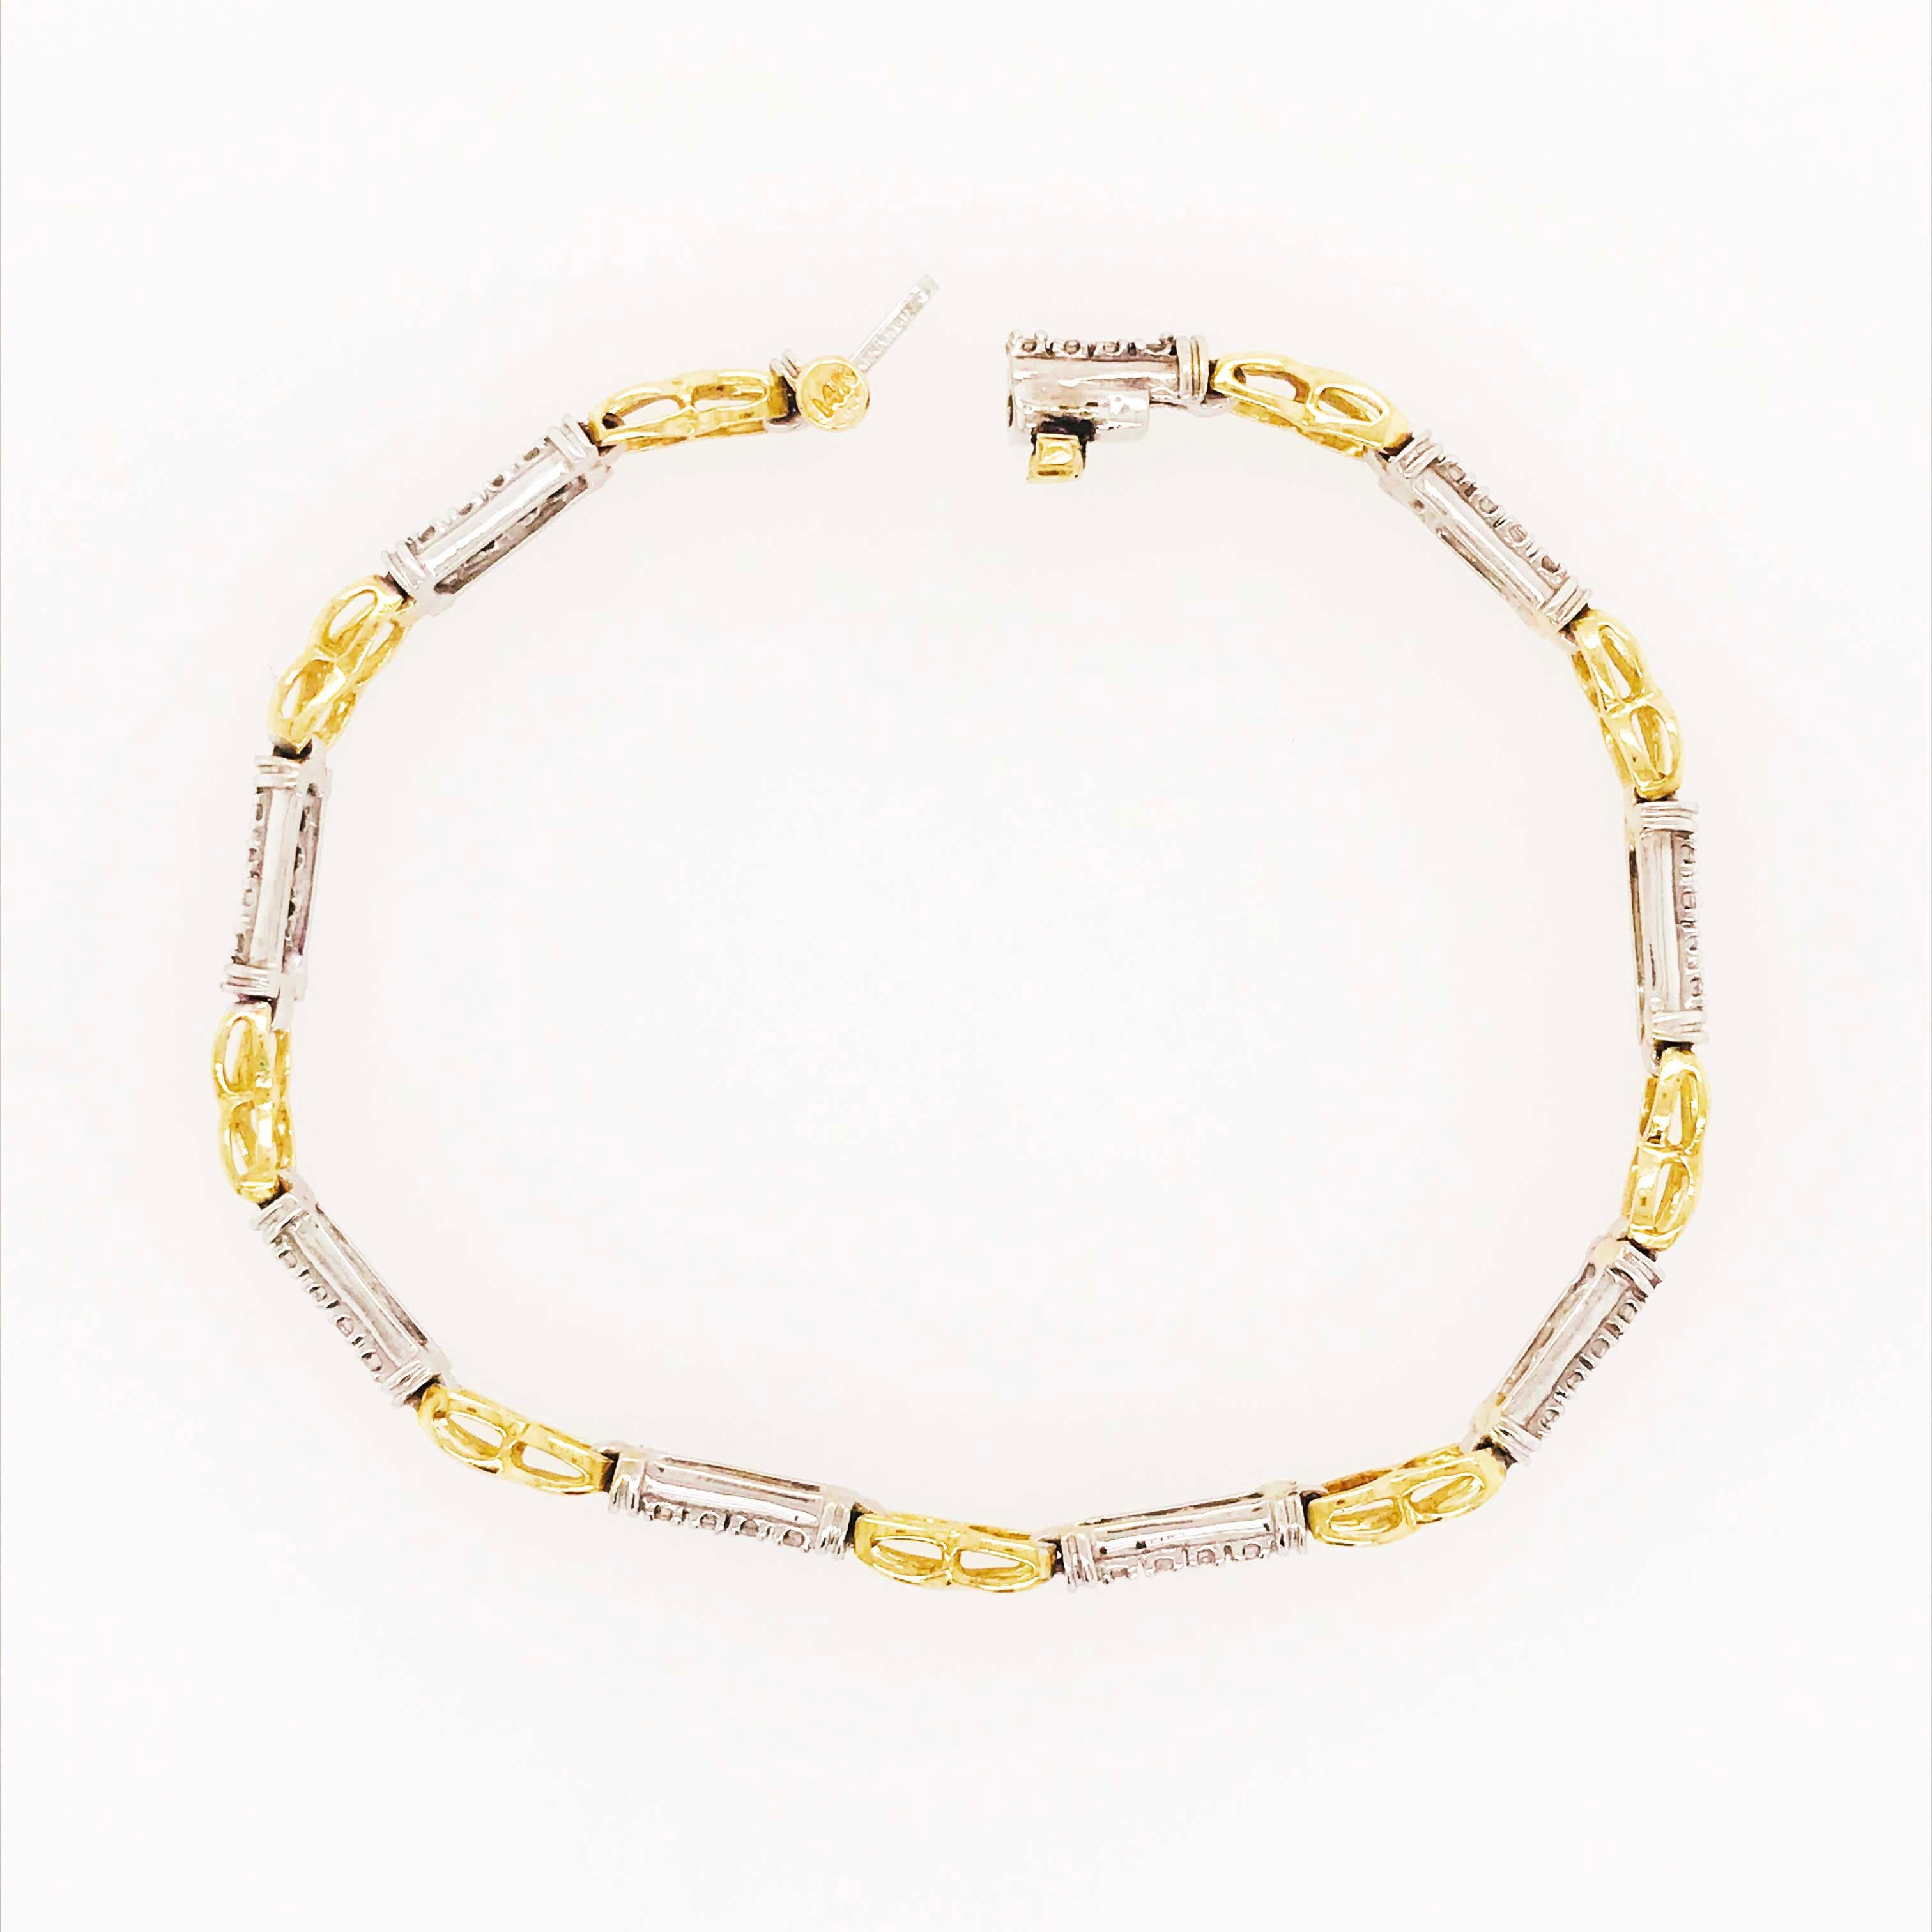 Round Cut Two-Tone Diamond Bracelet with Alternating White and Yellow Gold Links 1/2 Carat